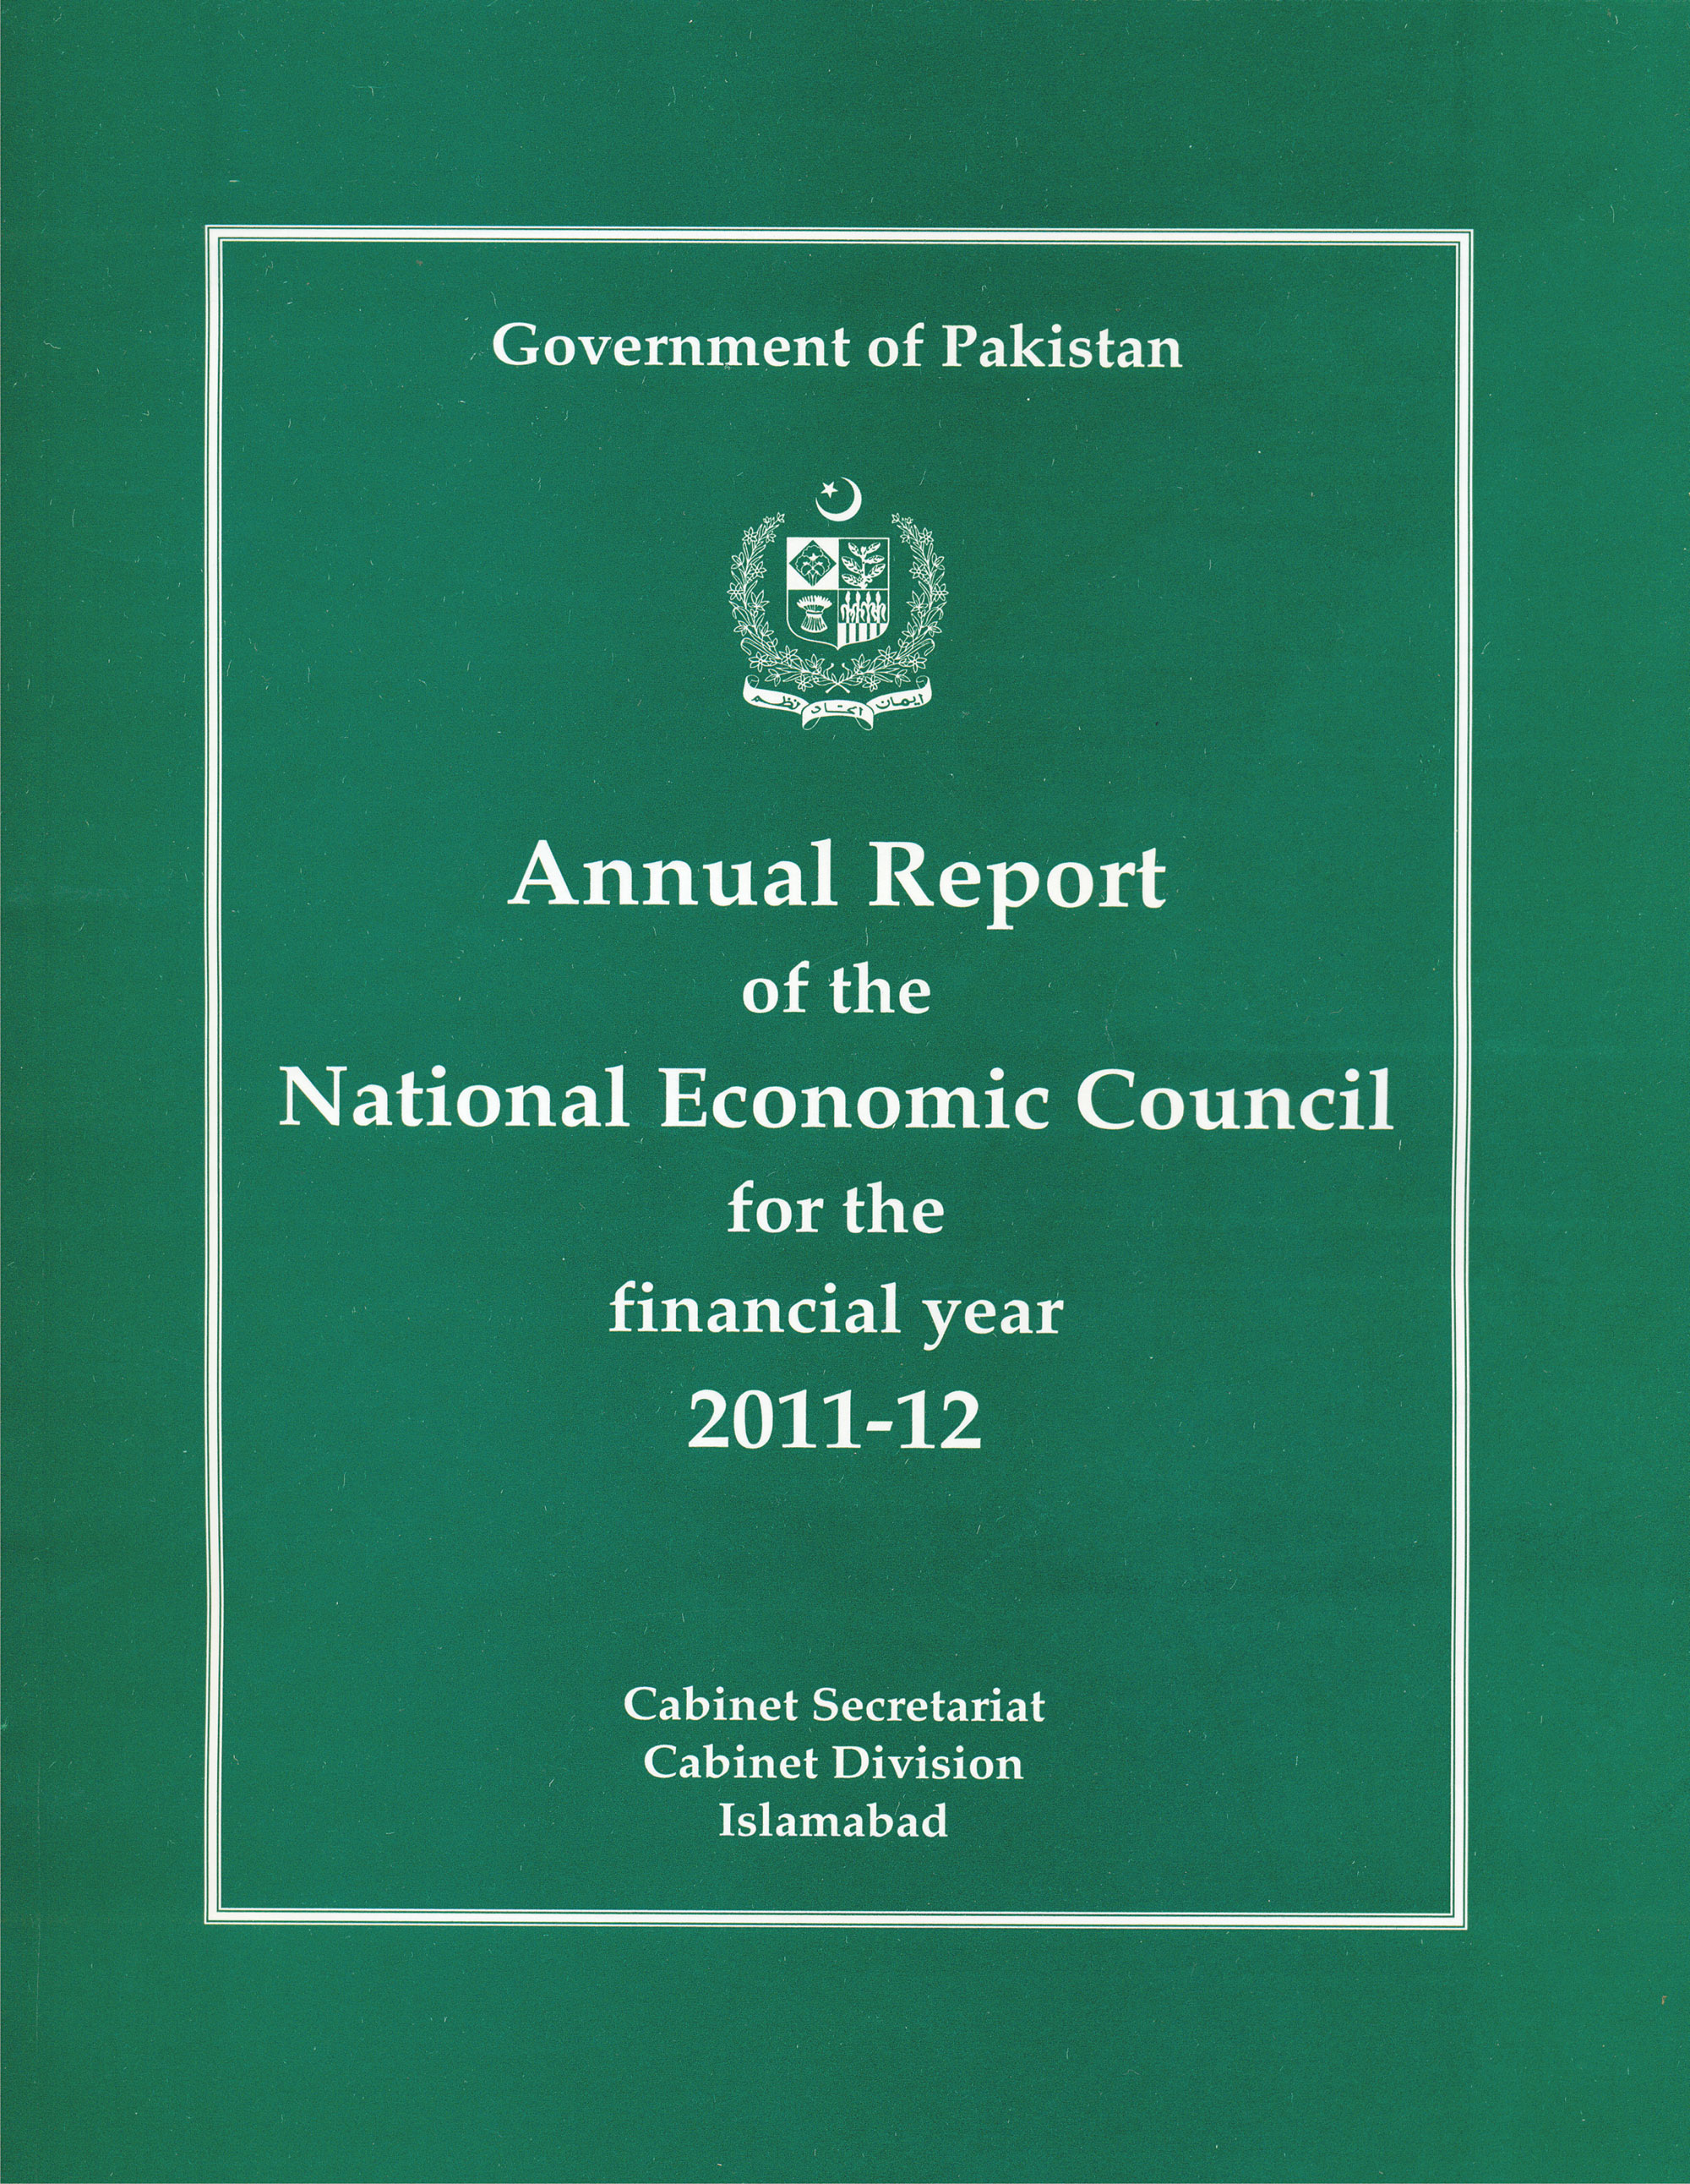 Annual Report of the National Economic Council for the Financial Year 2011-12: A review